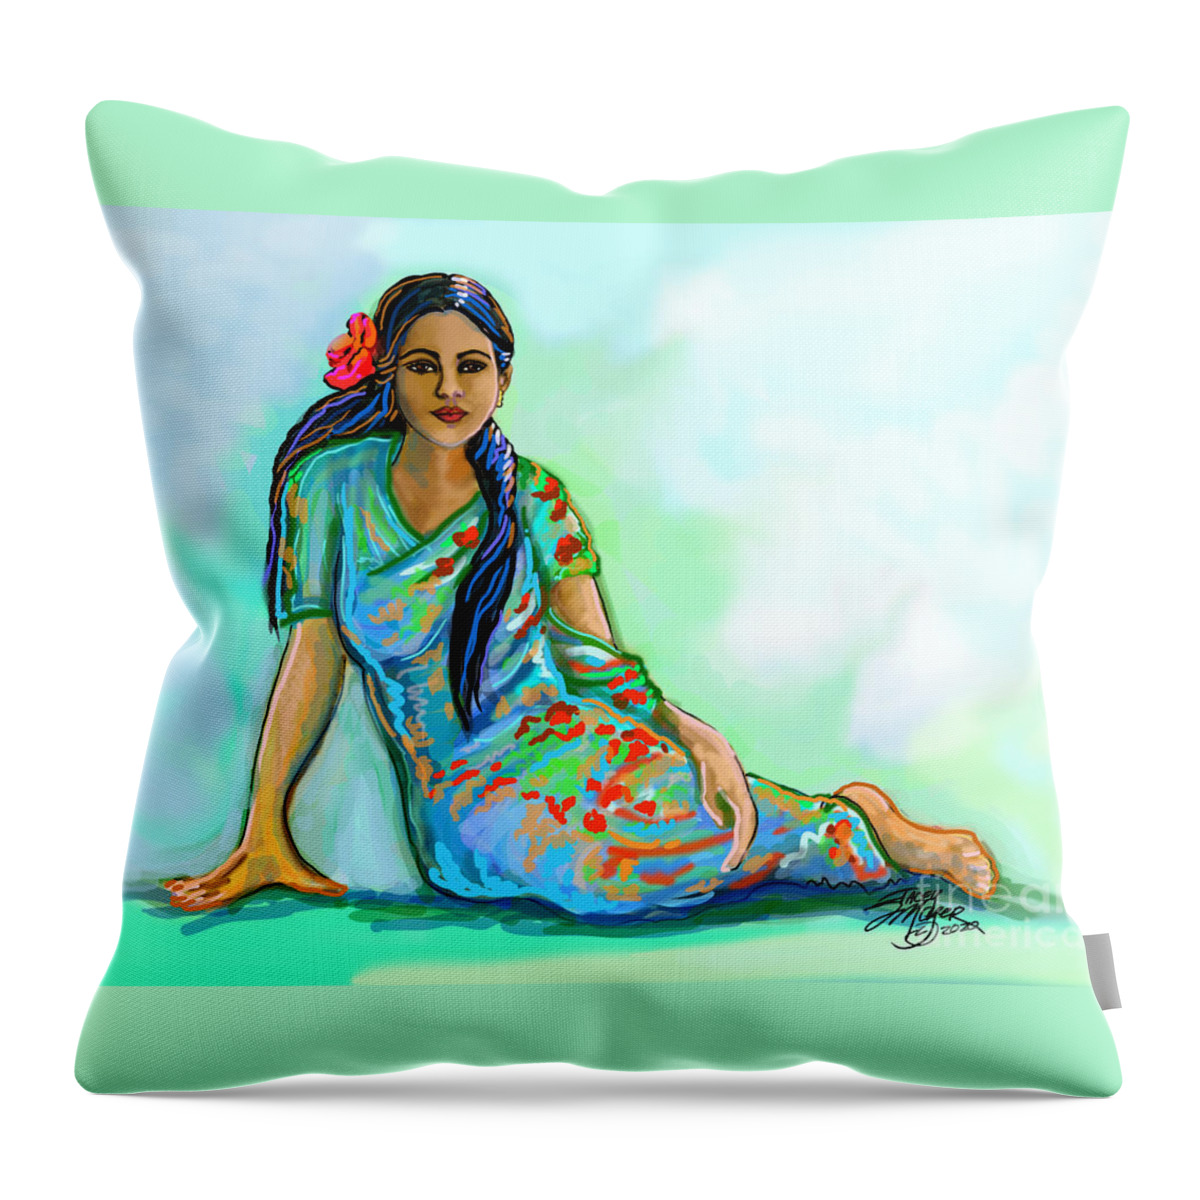 Indian Woman With Sari Throw Pillow featuring the digital art Indian Woman With Flower by Stacey Mayer